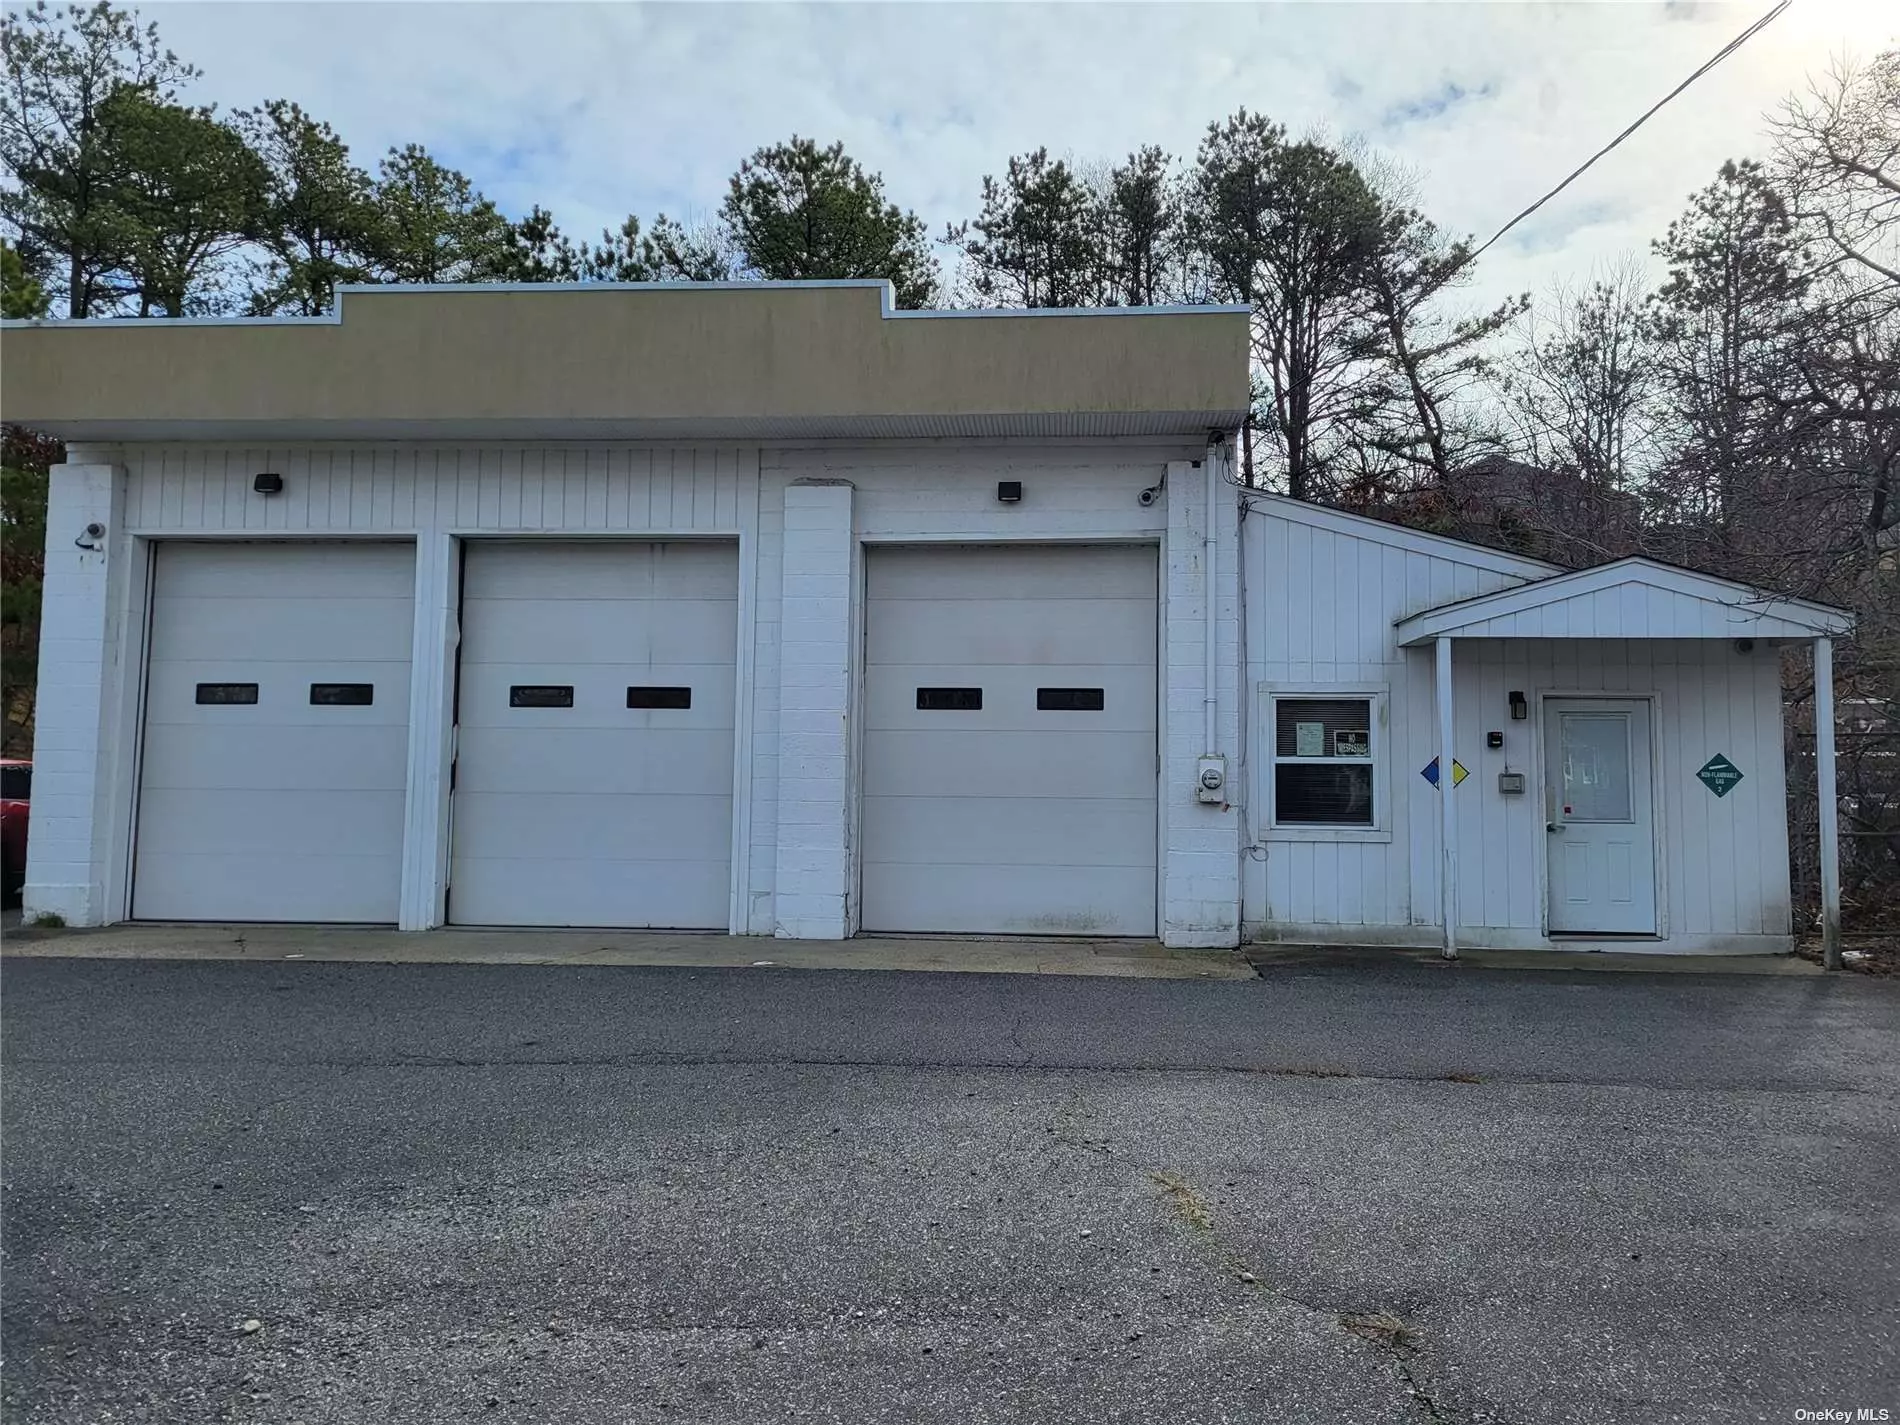 Location, Location! Calling all Contractors, Landscapers, Mechanics. Perfect rental with easy access to Montauk Hwy, Sunrise Hwy. Avoid the trade parade. 3 Bay garage with 2 office spaces, 2 baths & storage space.